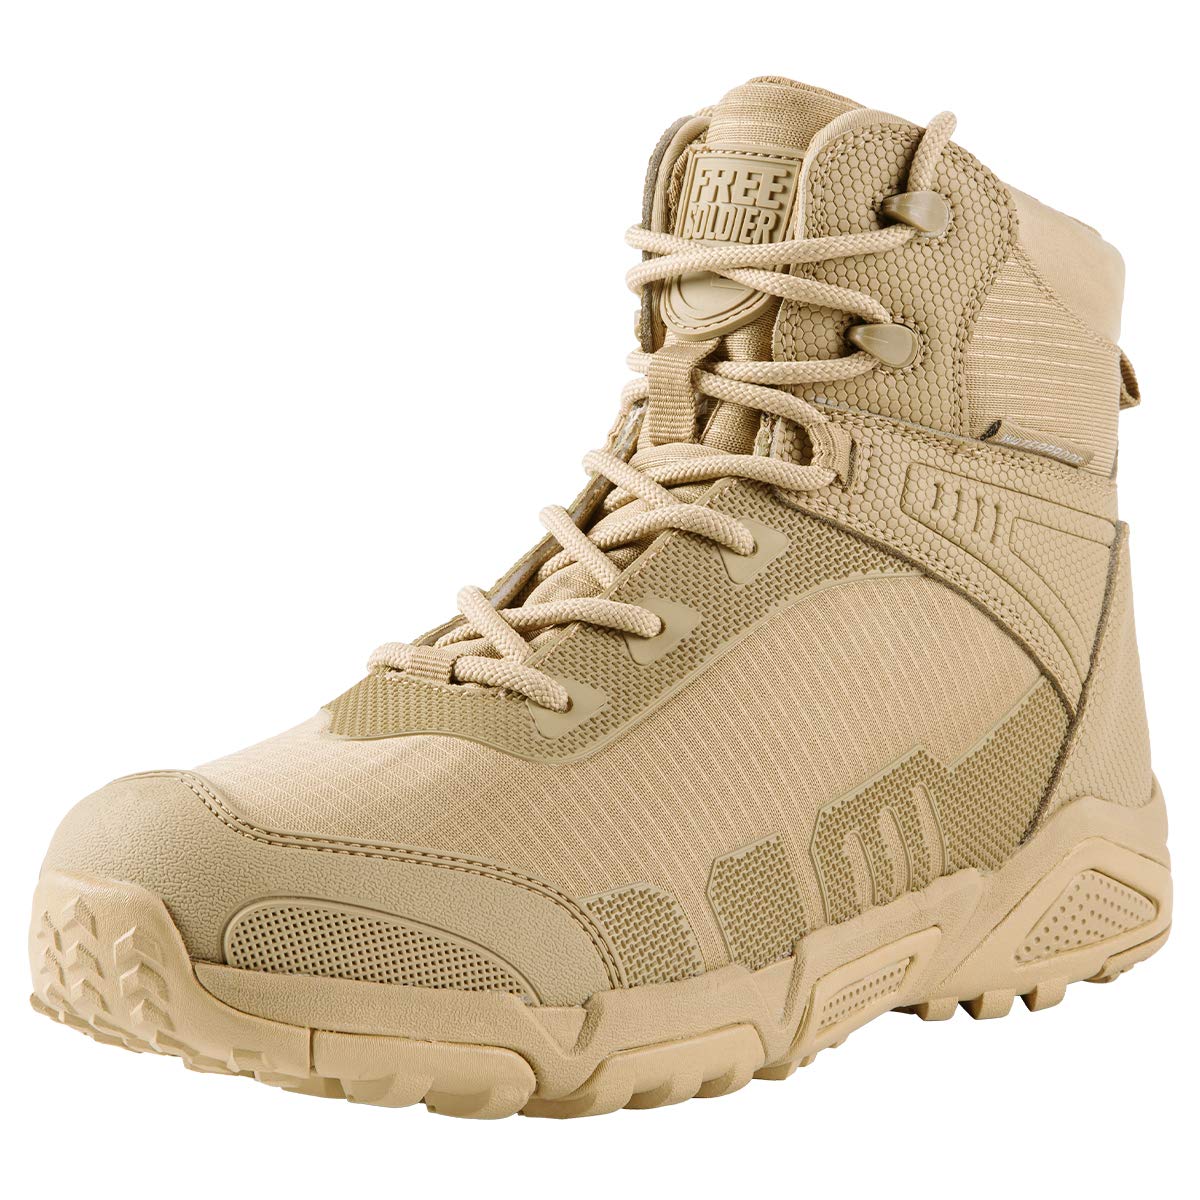 Free Soldier Mens Tactical Boots 6 Inches Lightweight Combat Boots Durable Hiking Boots Military Desert Boots (Tan, 12 Wide Us)